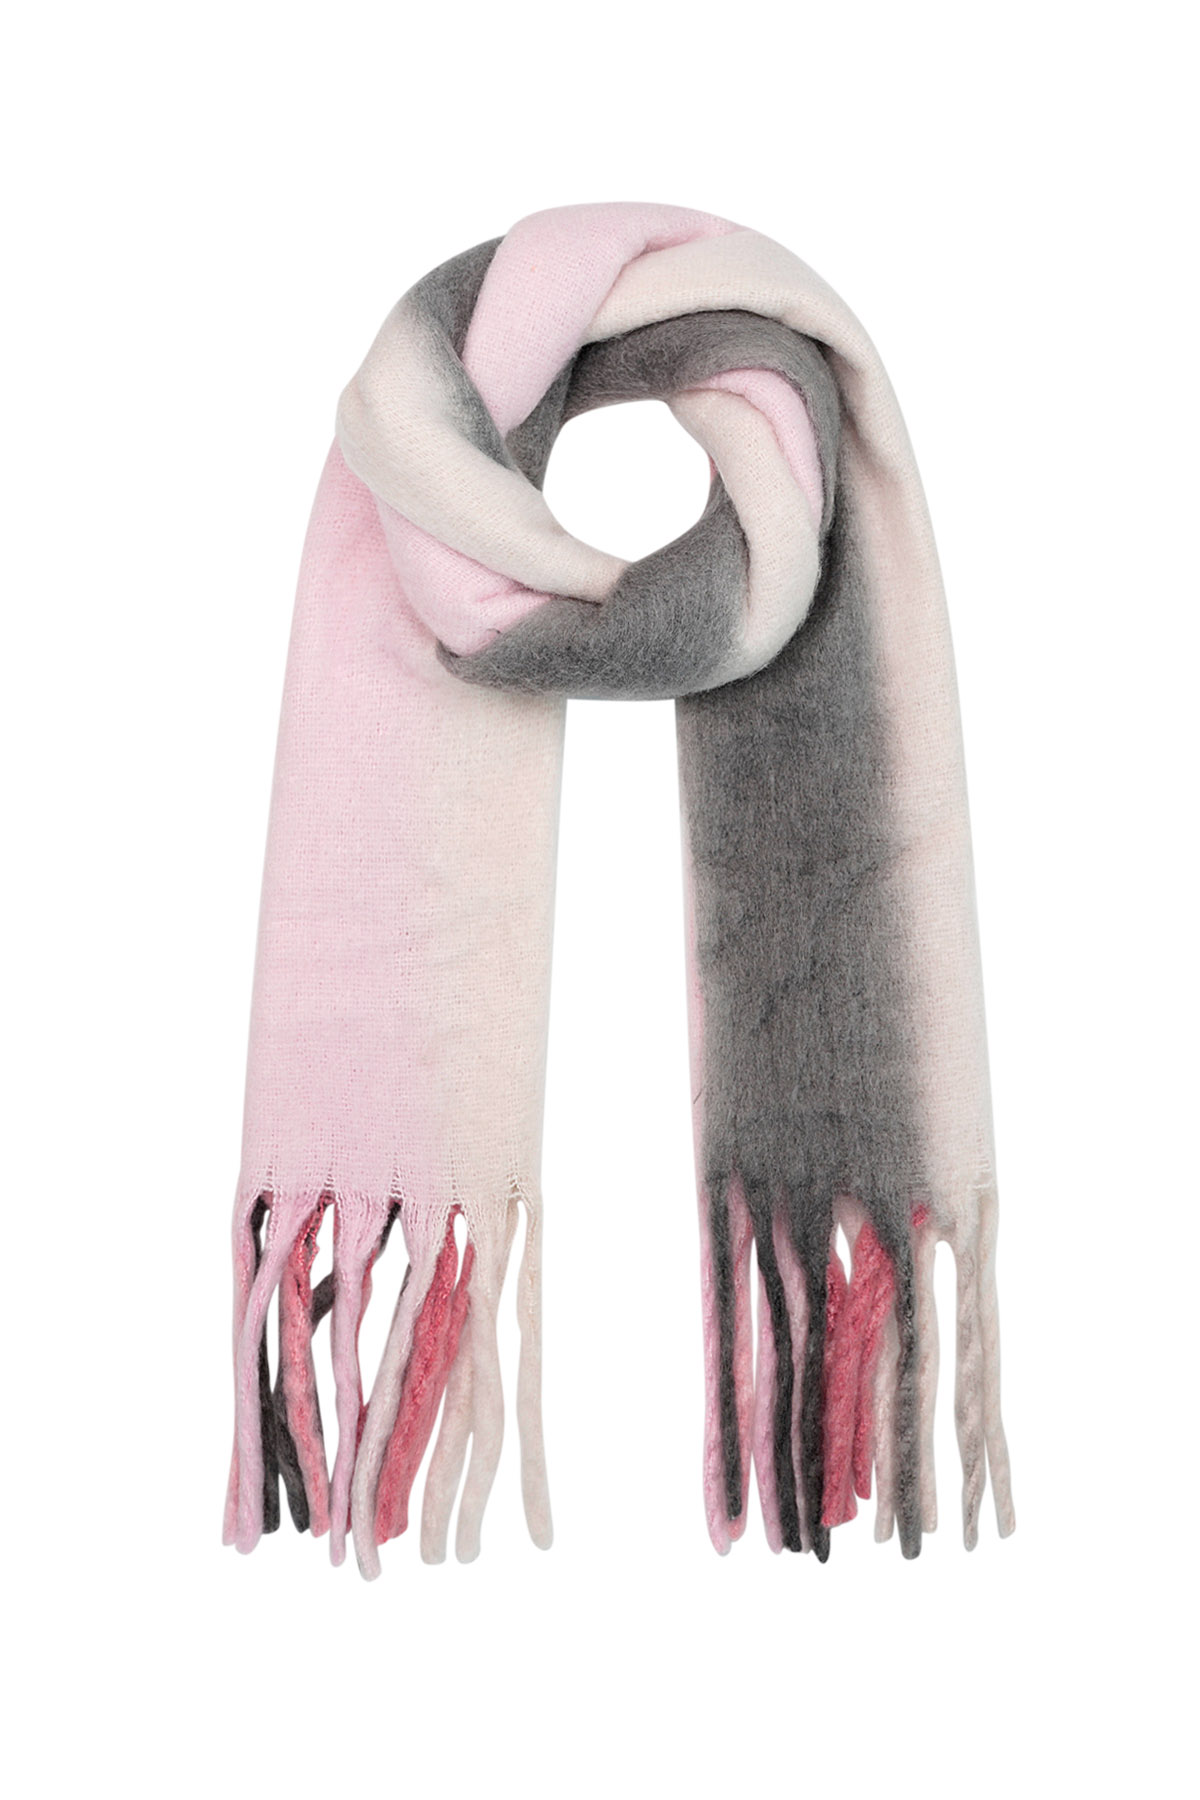 Winter scarf ombré colors pink/grey Polyester 